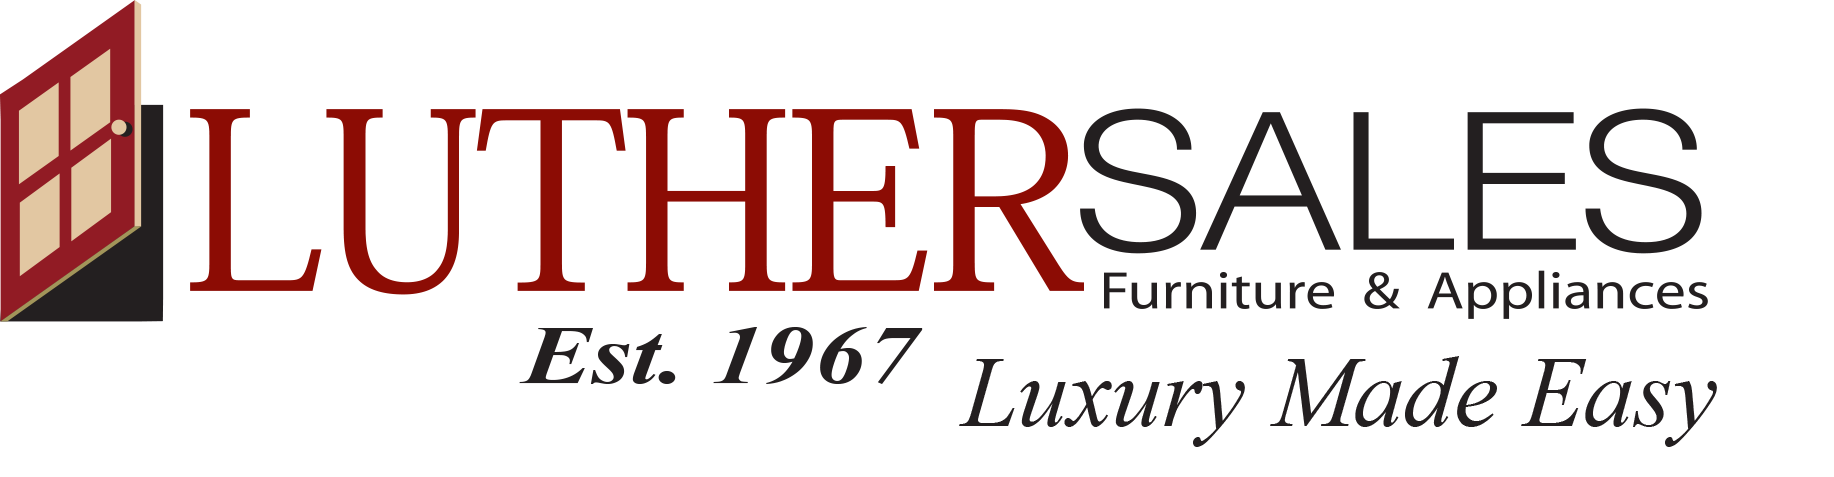 LutherSales.com